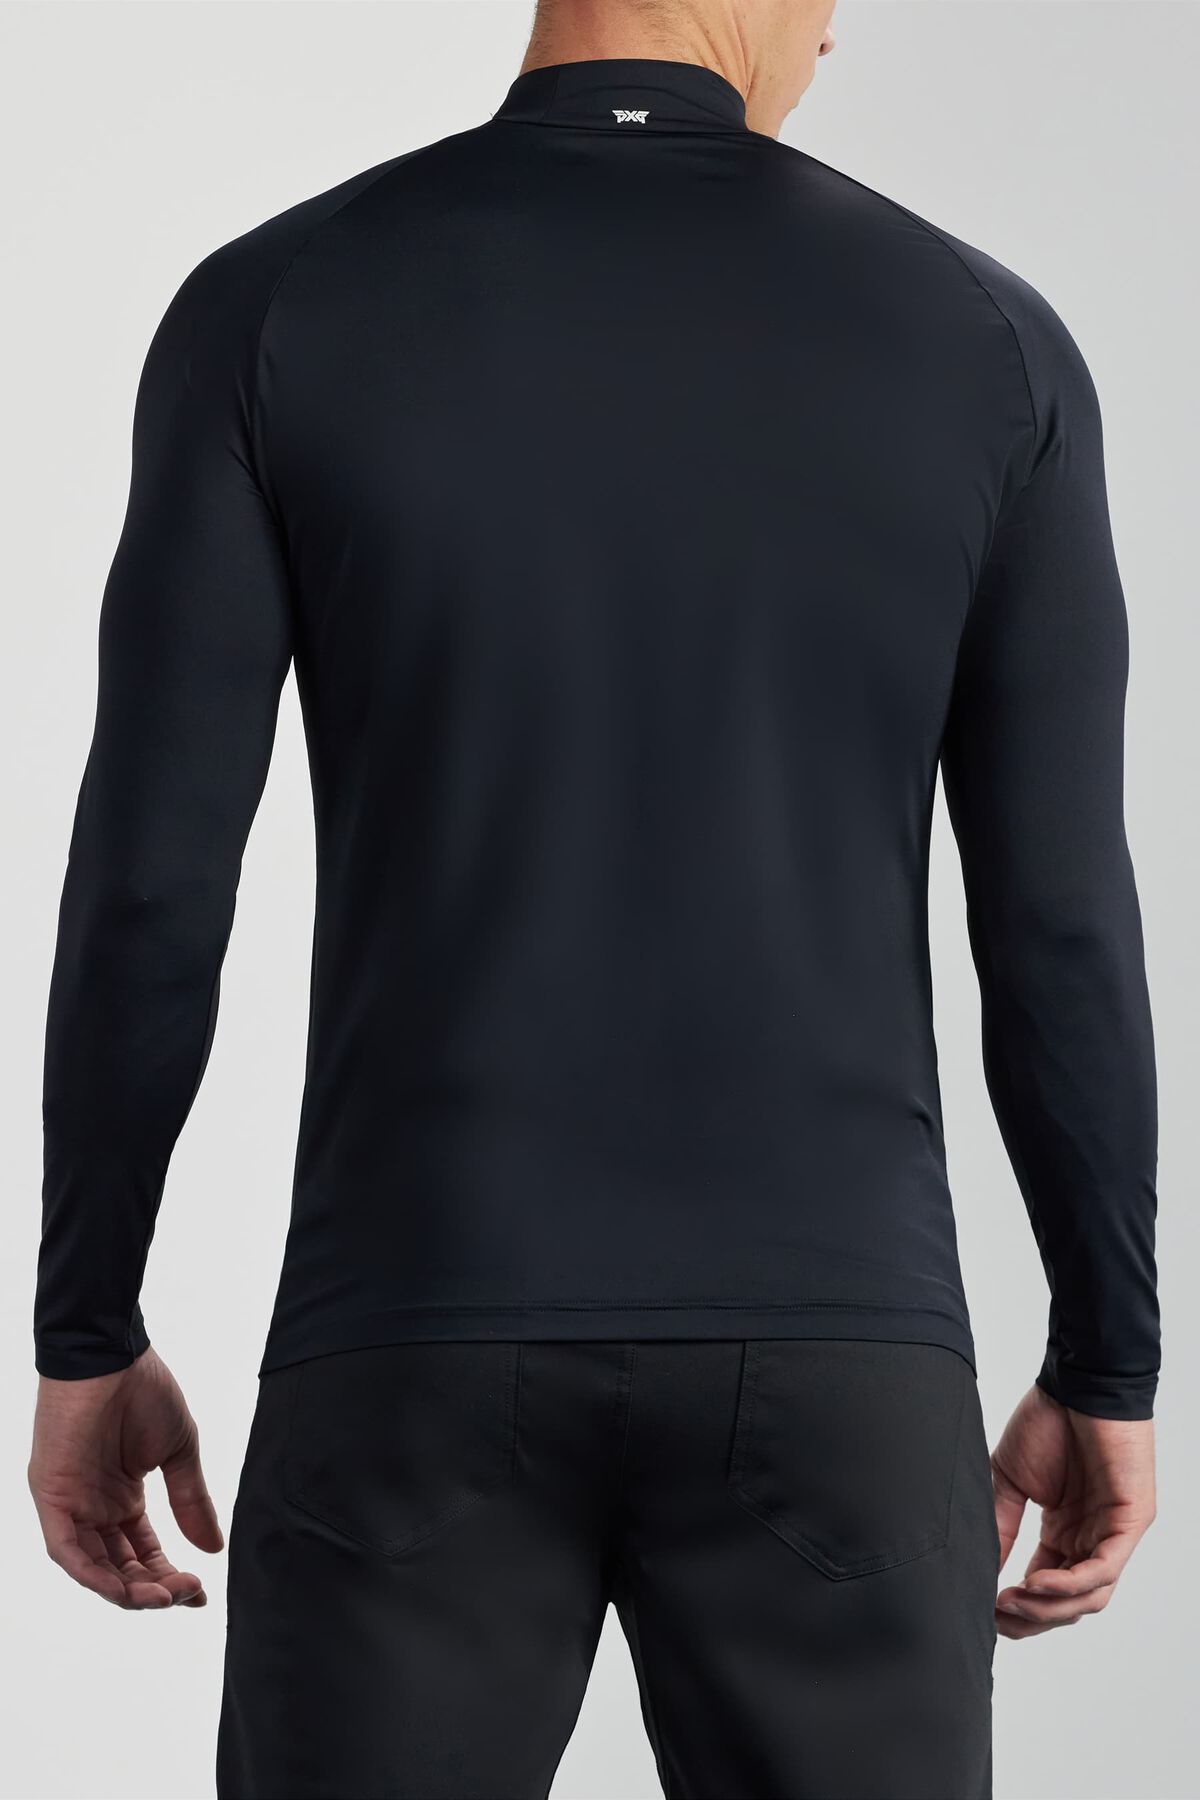 Essential Baselayer | Men's Golf Base Layers | PXG